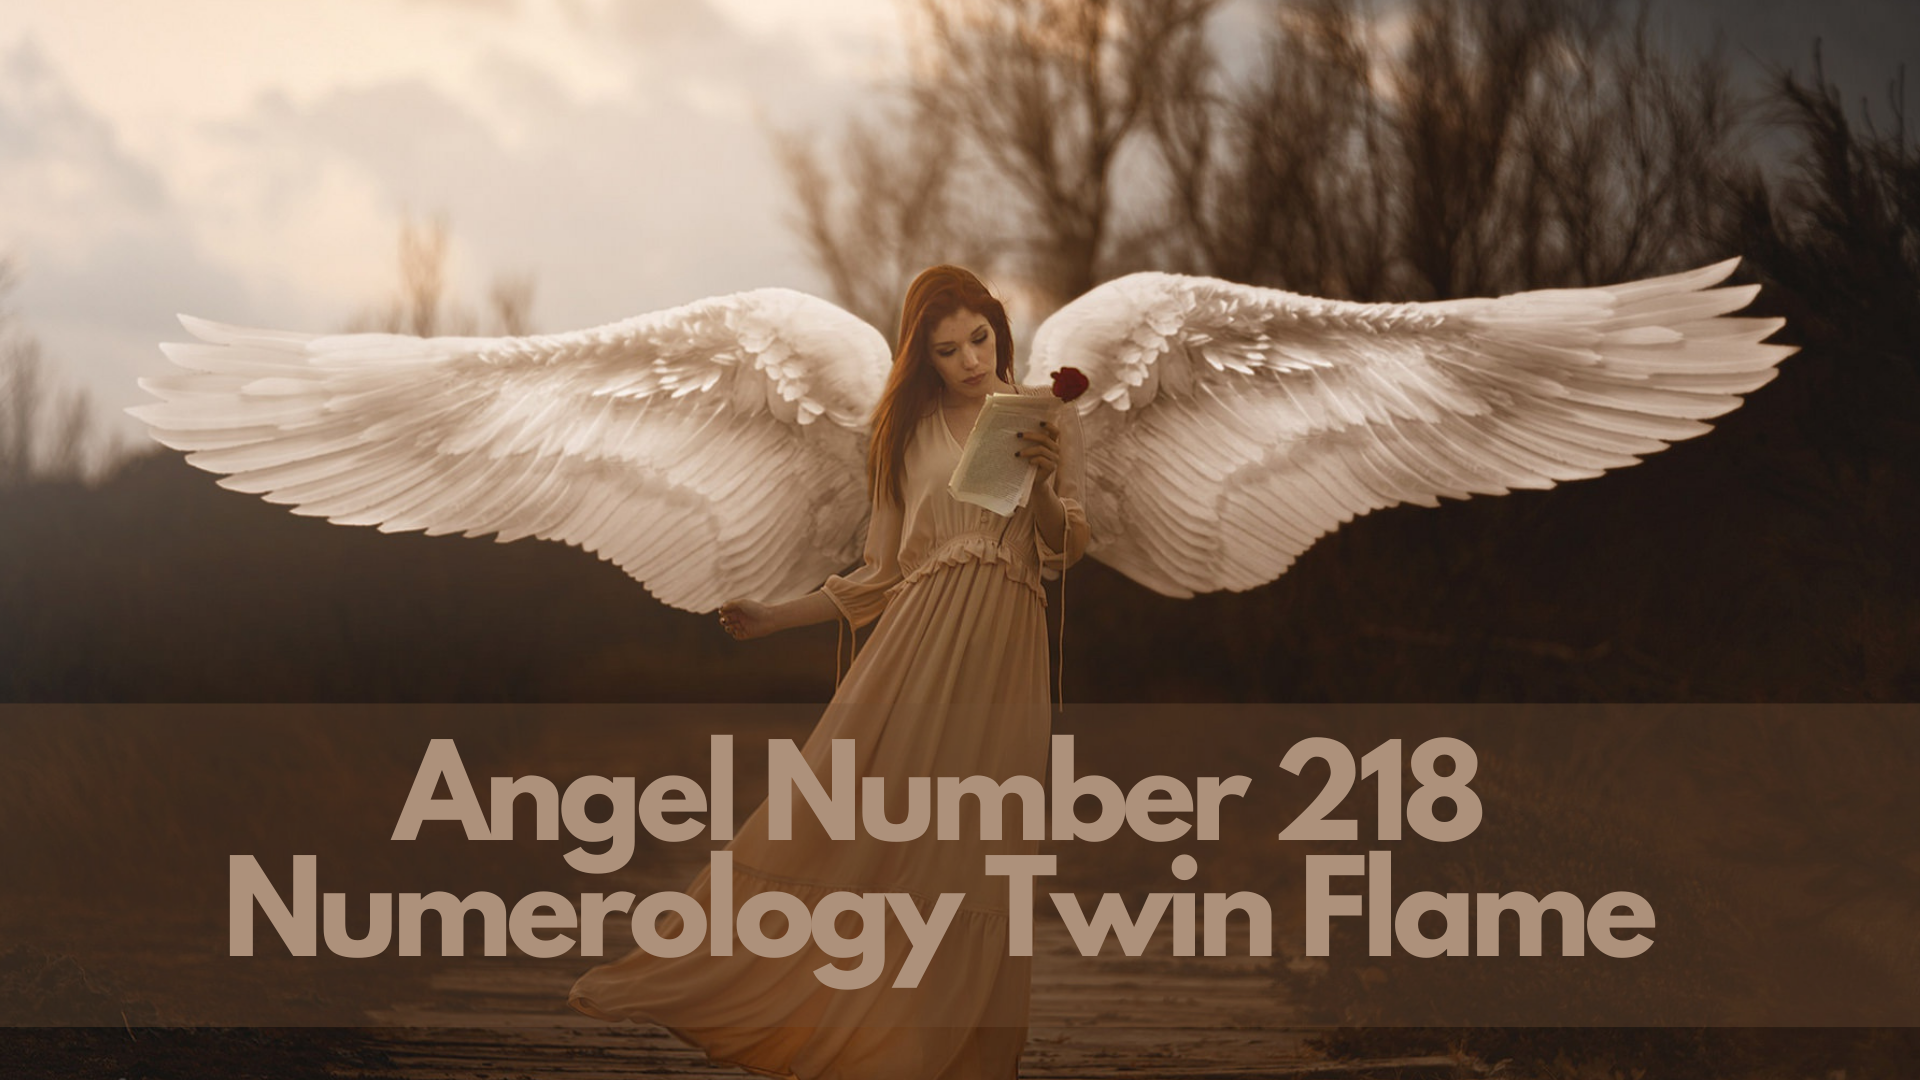 An angel holding a rose while reading with words Angel Number 218 Numerology Twin Flame